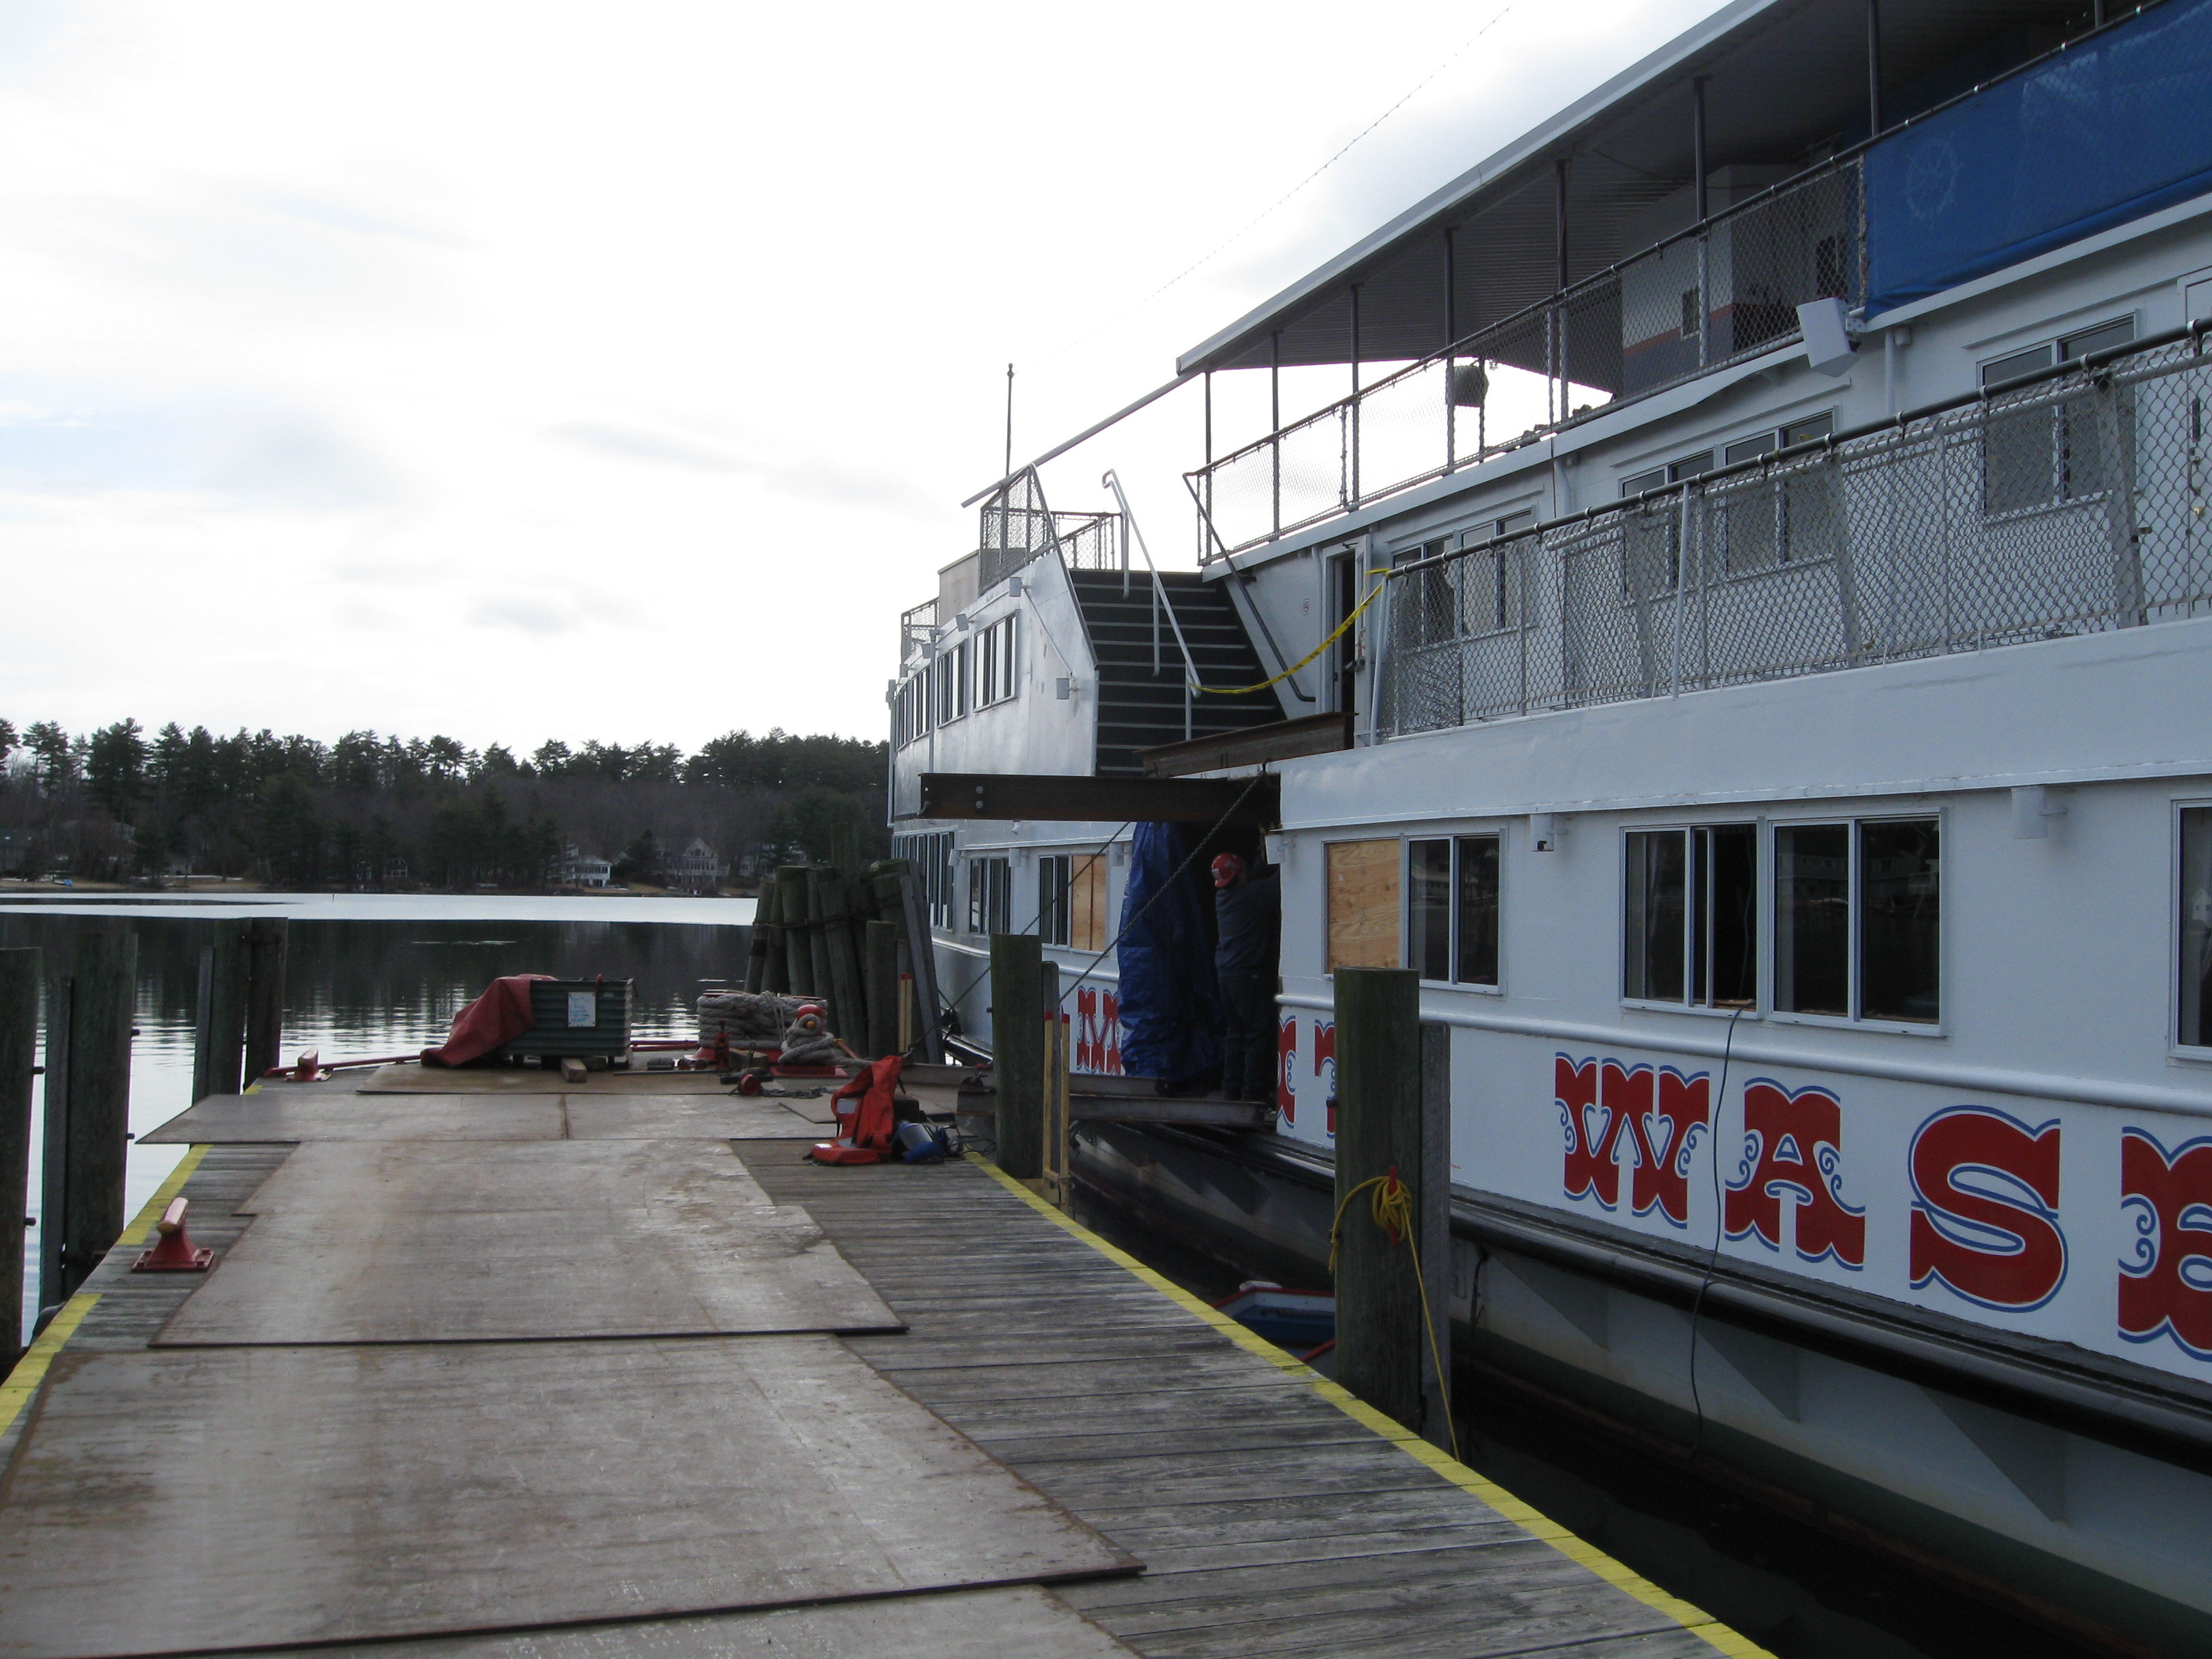 A view of the MS Mount Washington Cruise ship from the dock on Lake Winnipesaukee in Laconia NH prior to Louis P. Cote, Inc.'s riggers removing the engine.